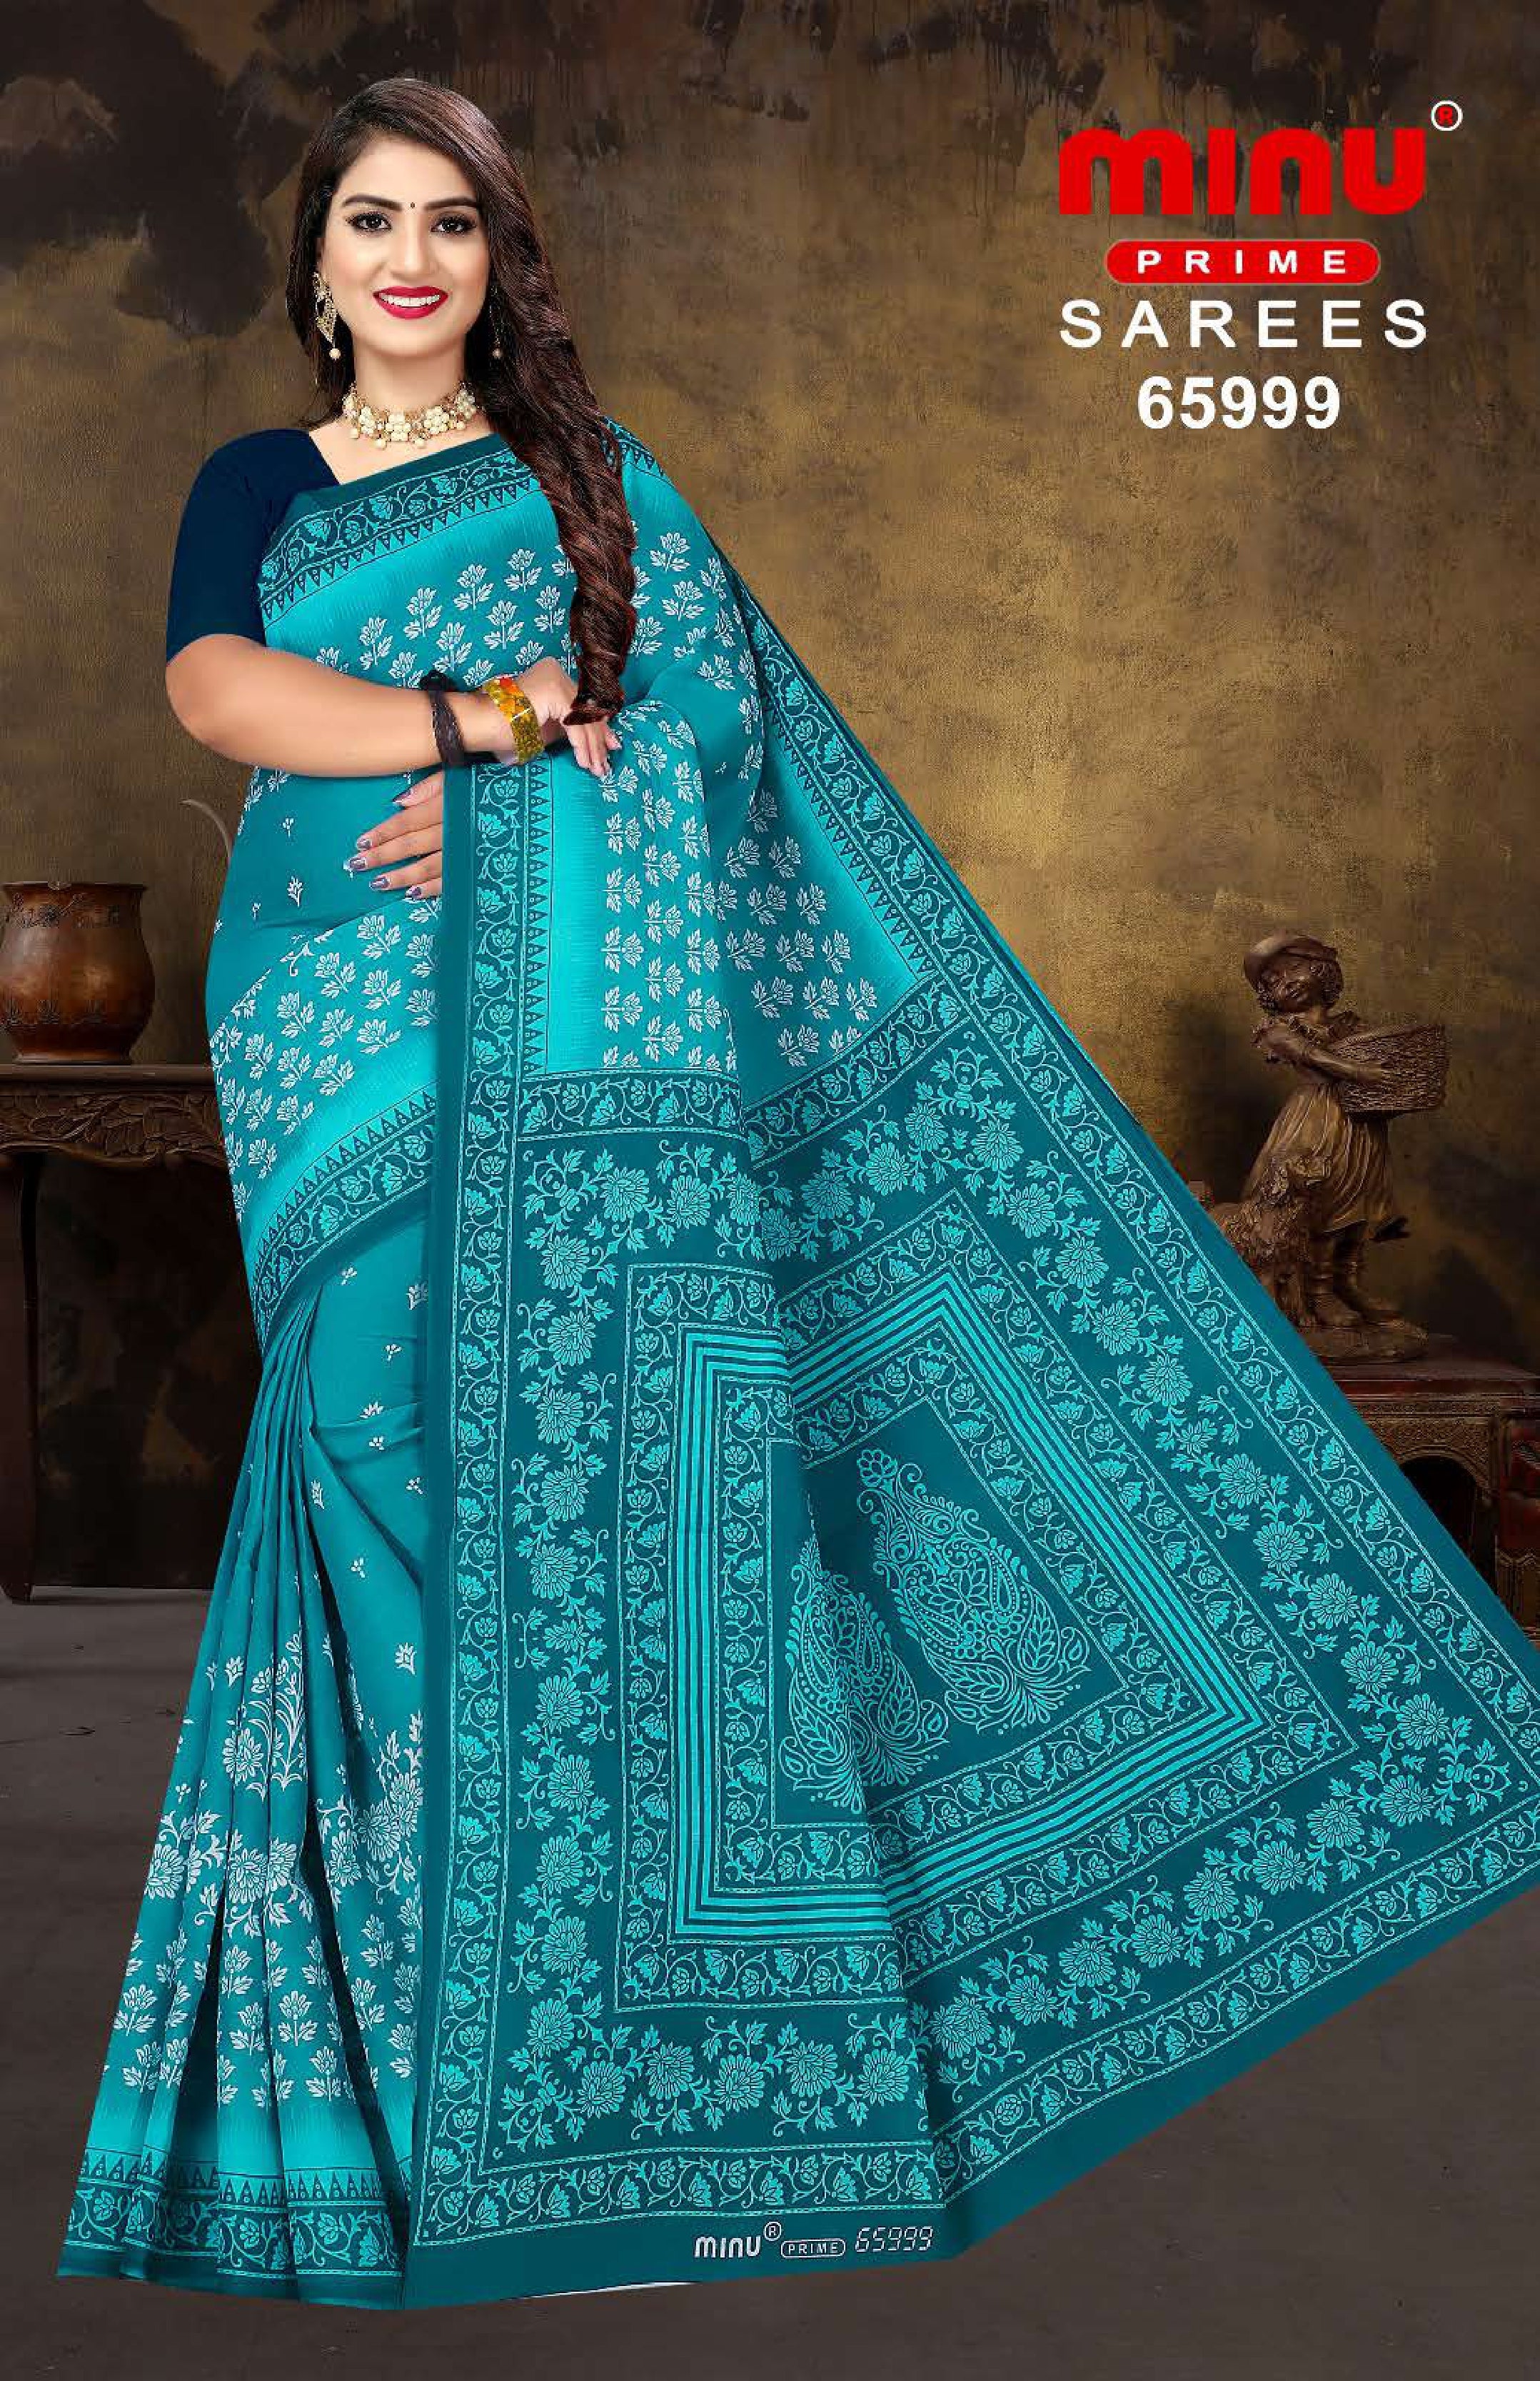 wearing woman Wholesale Sarees Online